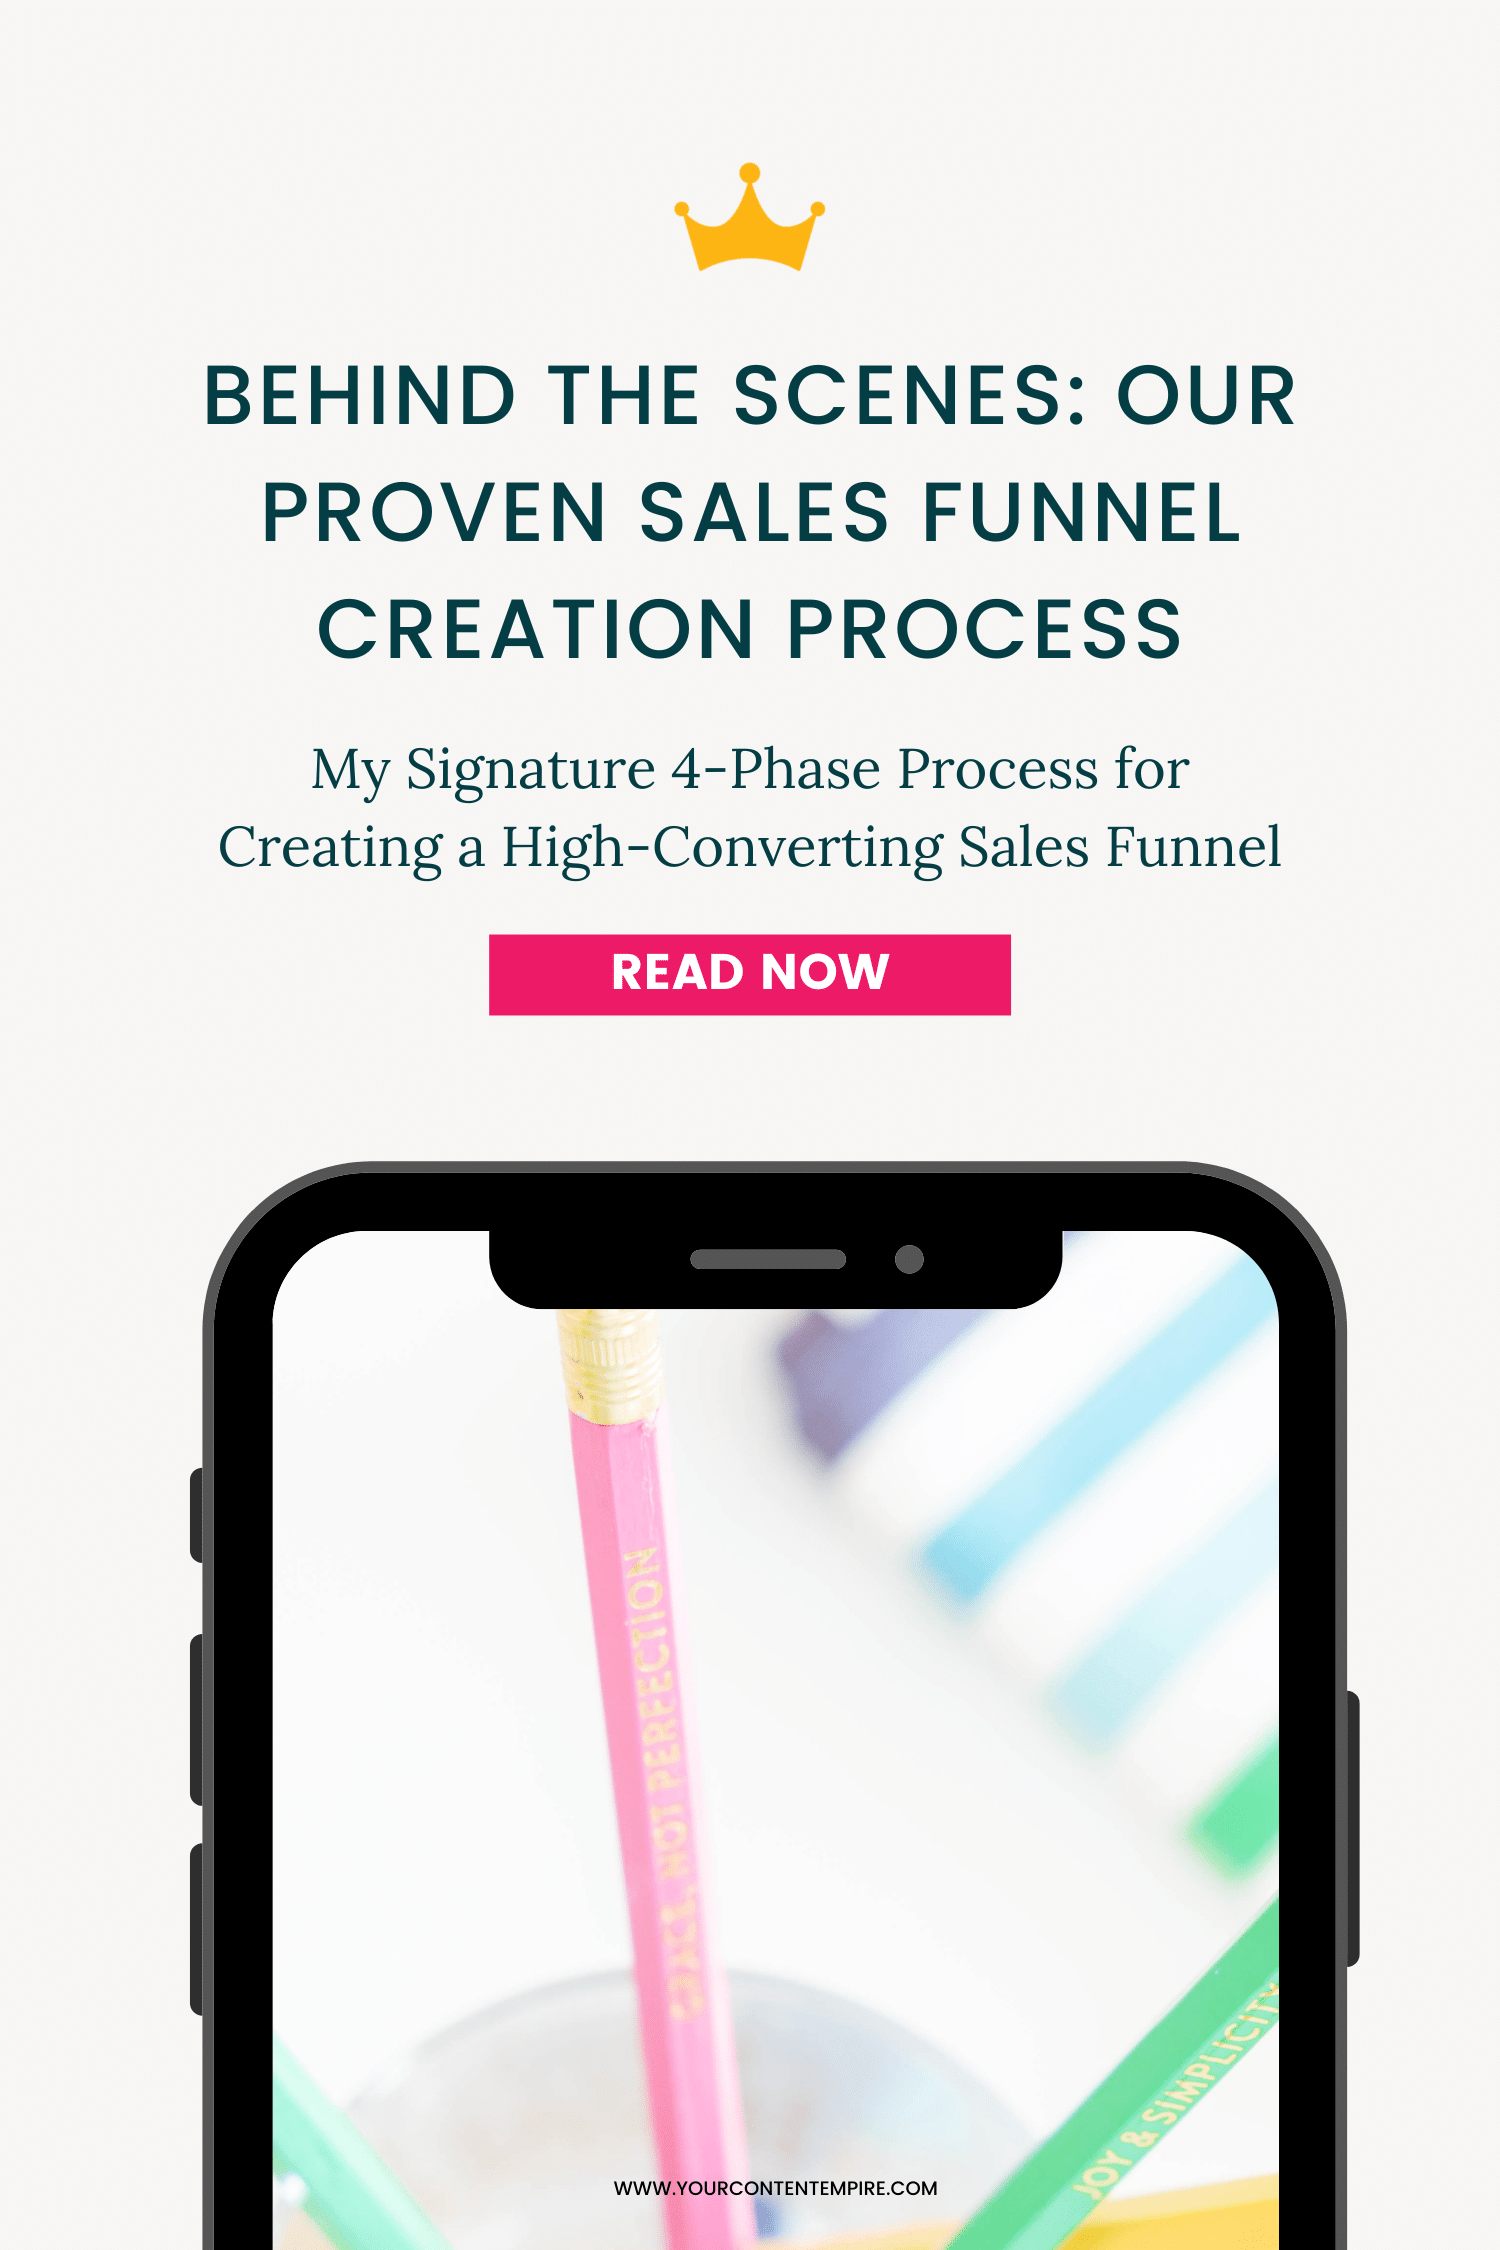 Behind The Scenes: Our Proven Sales Funnel Creation Process